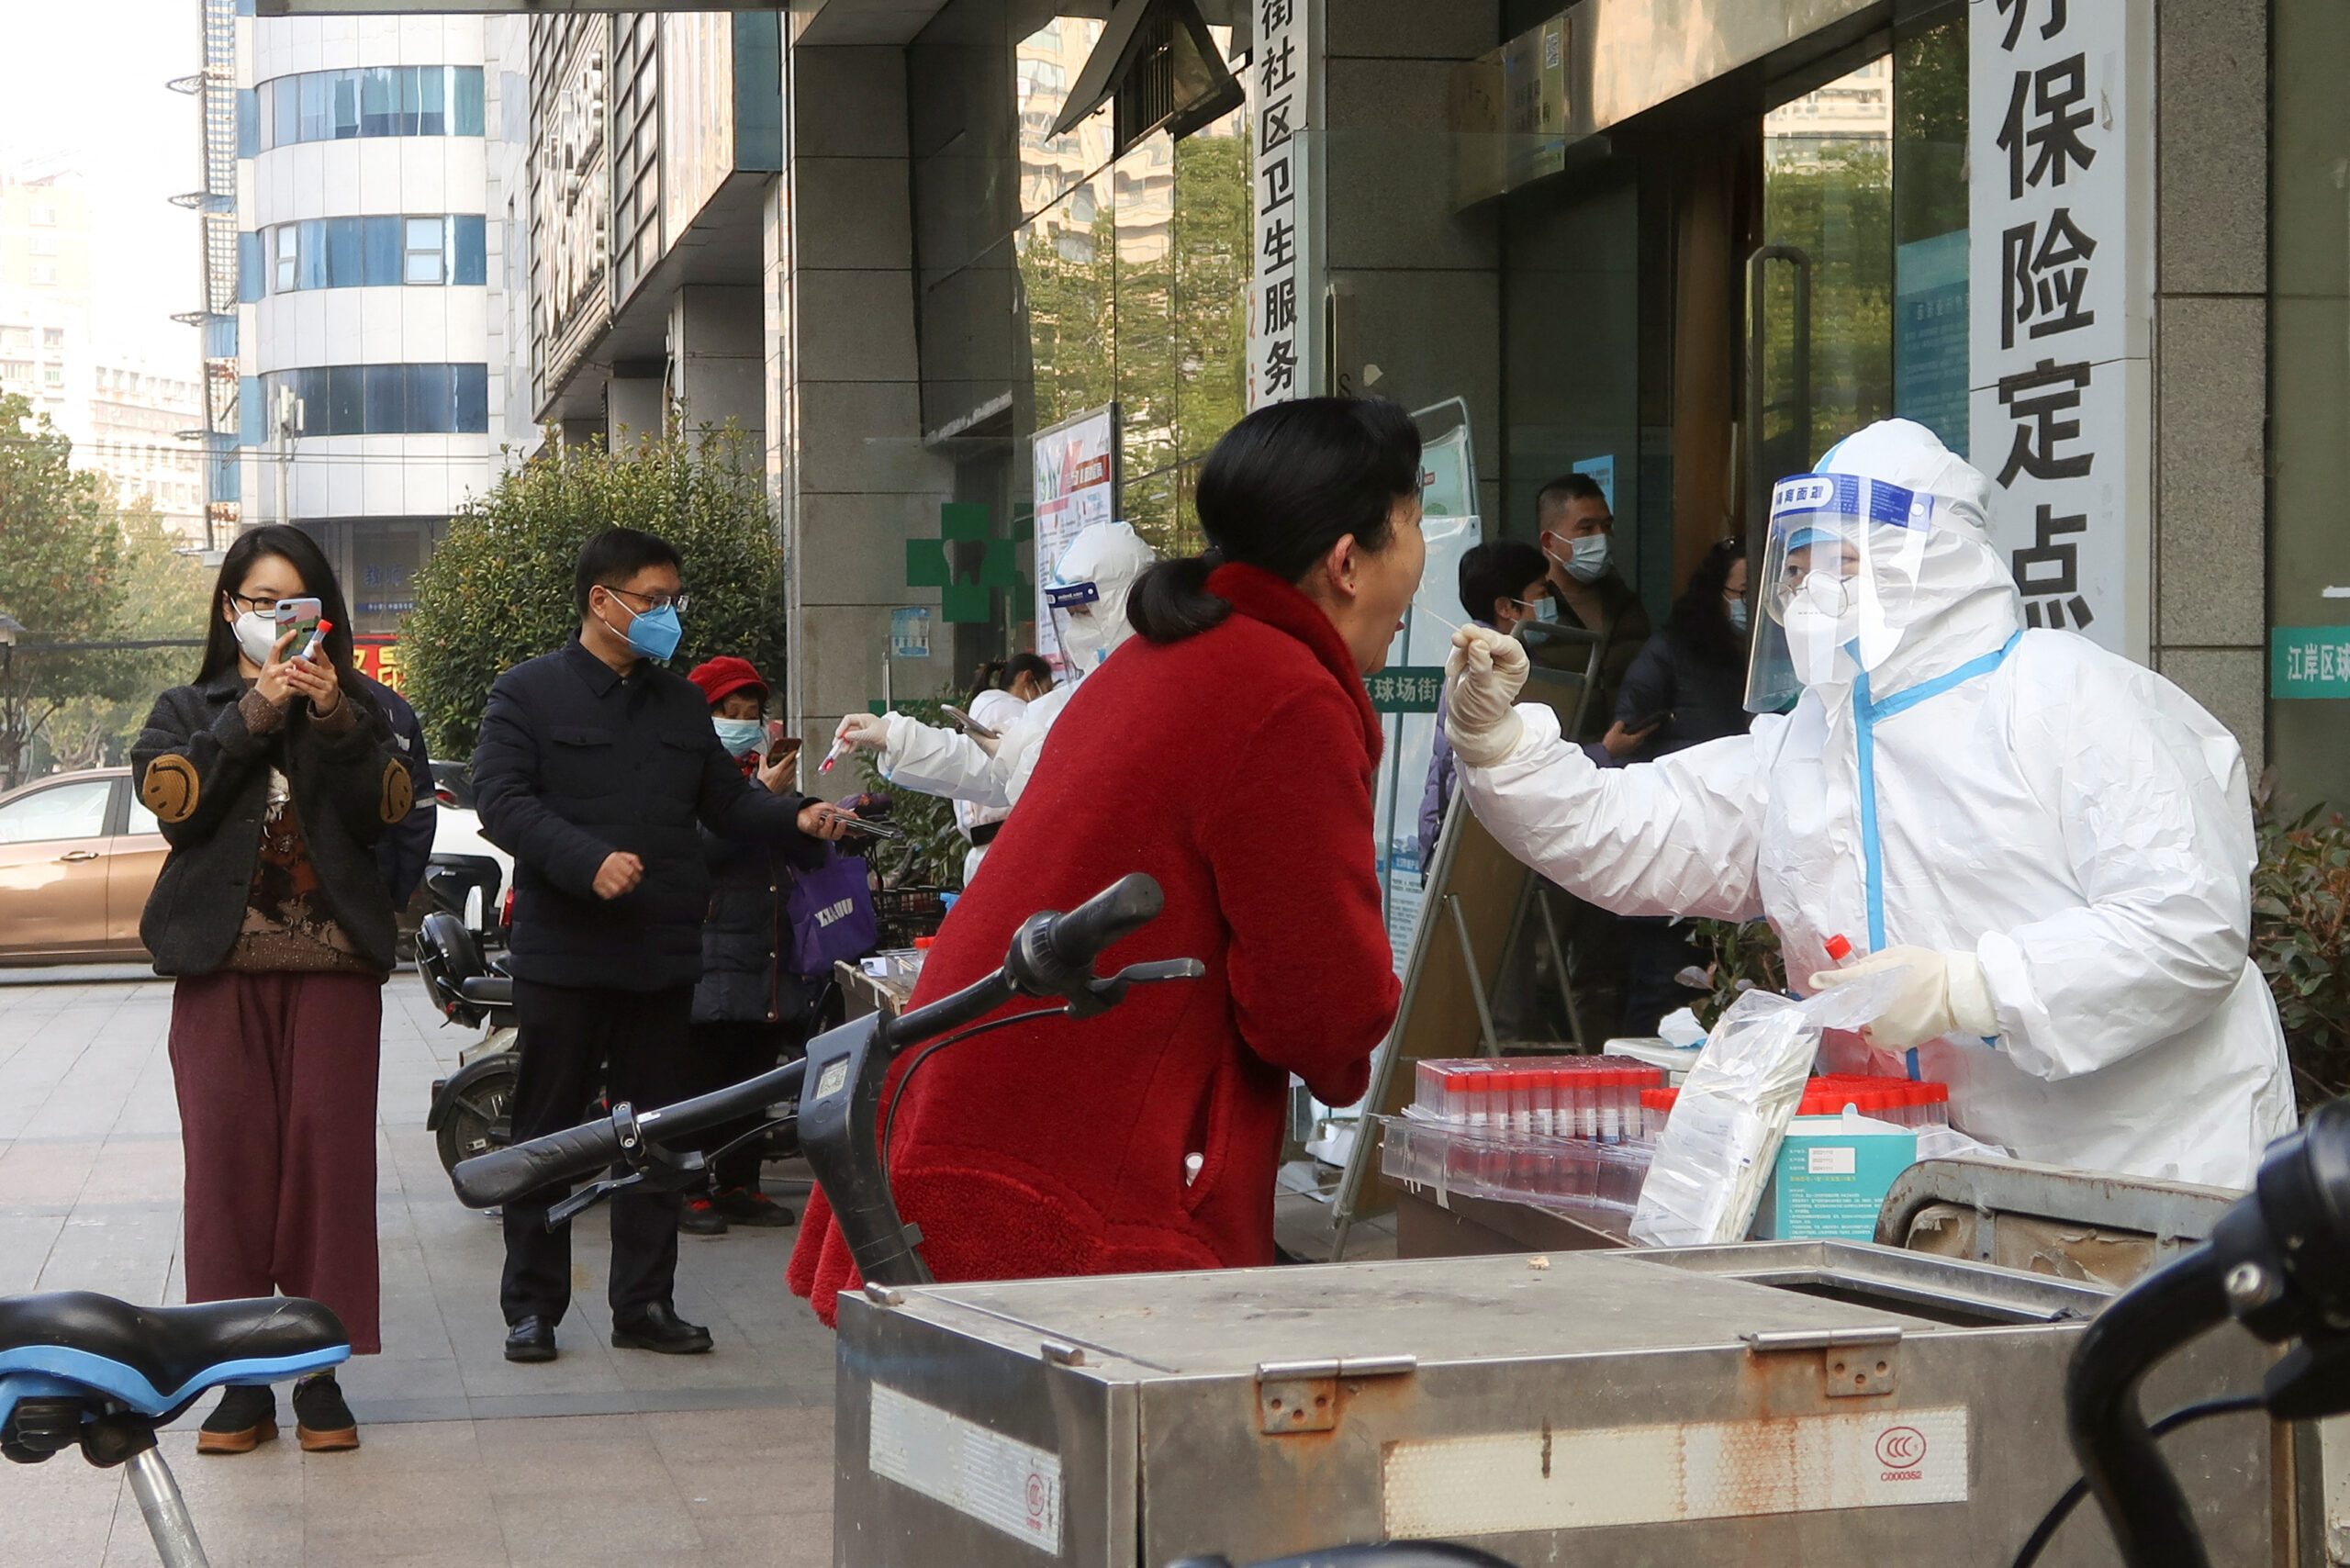 China tackles medical supply snags, price gouging amid COVID-19 fears